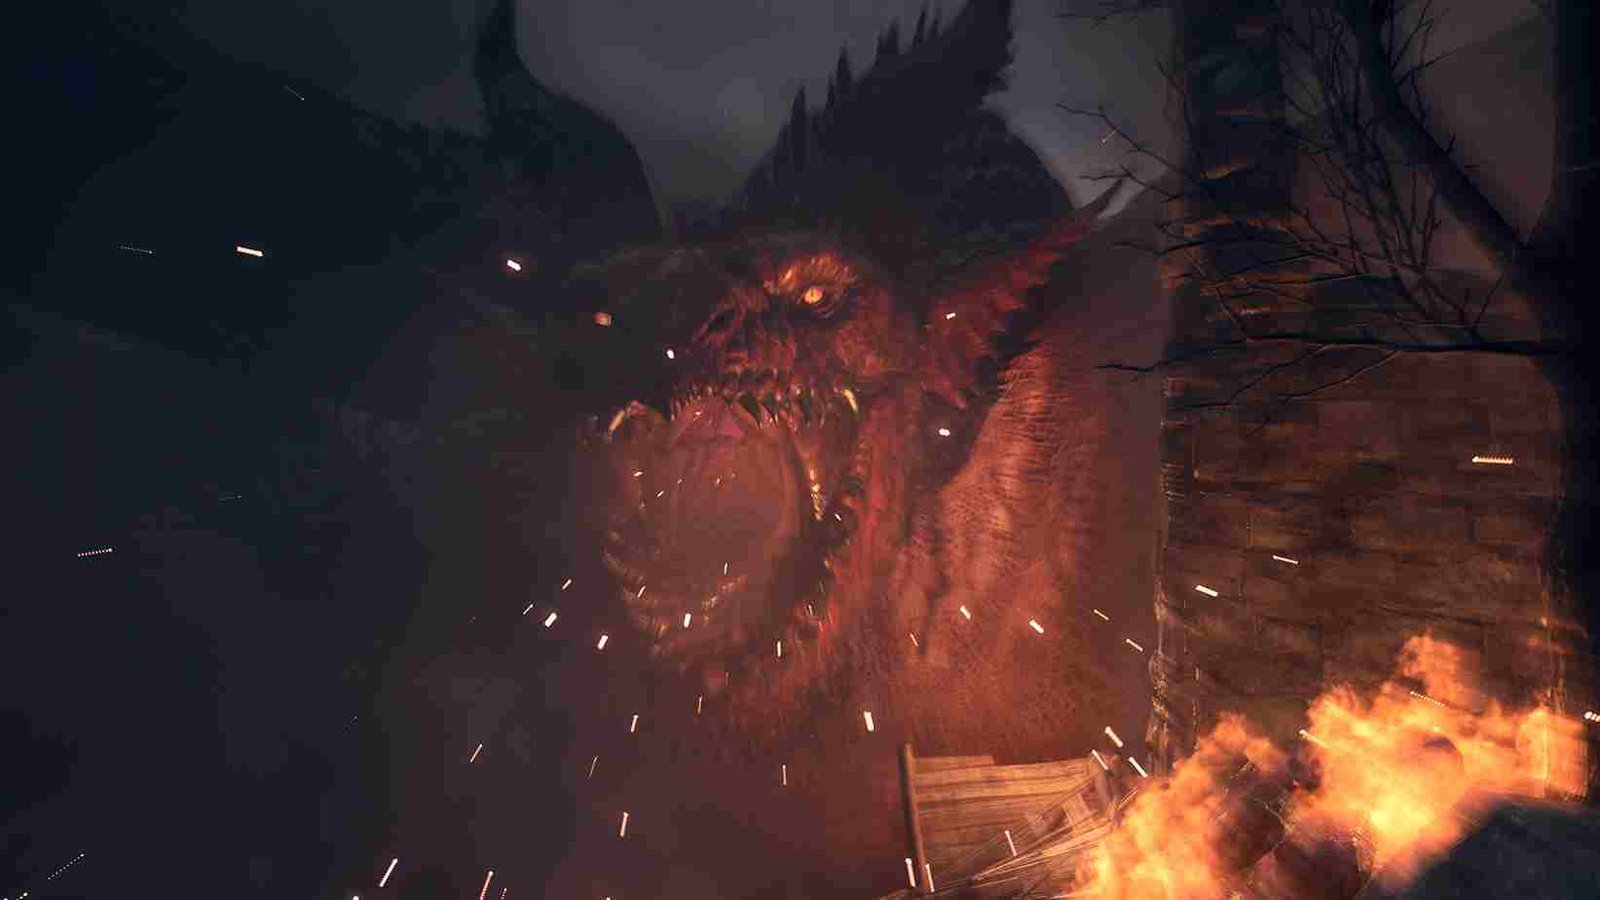 Dragon's Dogma 2 Lost Save progress issue troubling players Is there any fix yet